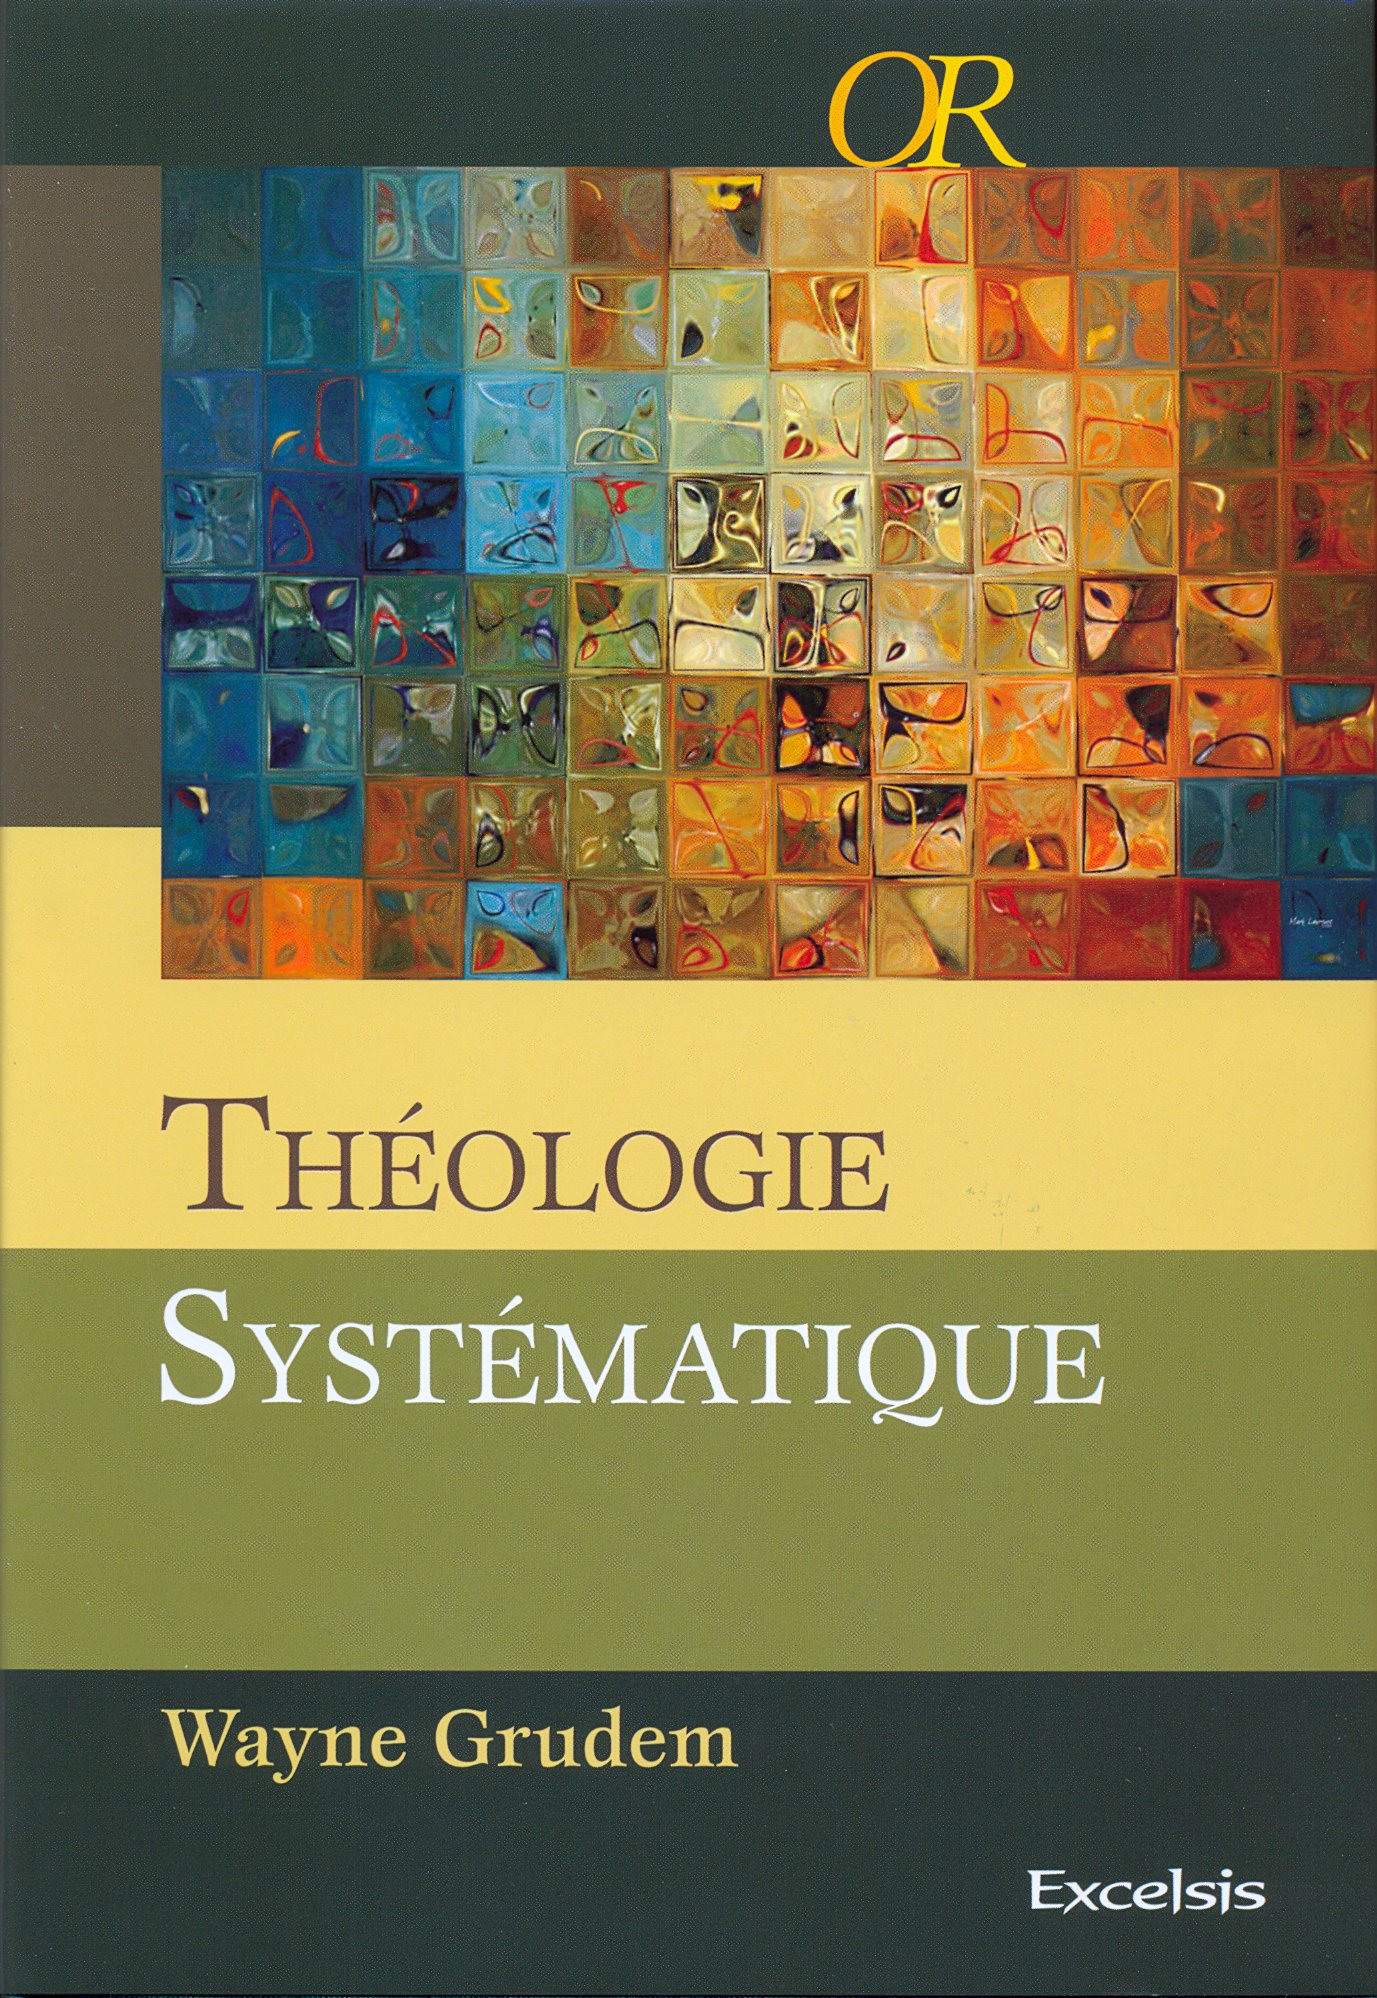 THEOLOGIE SYSTEMATIQUE